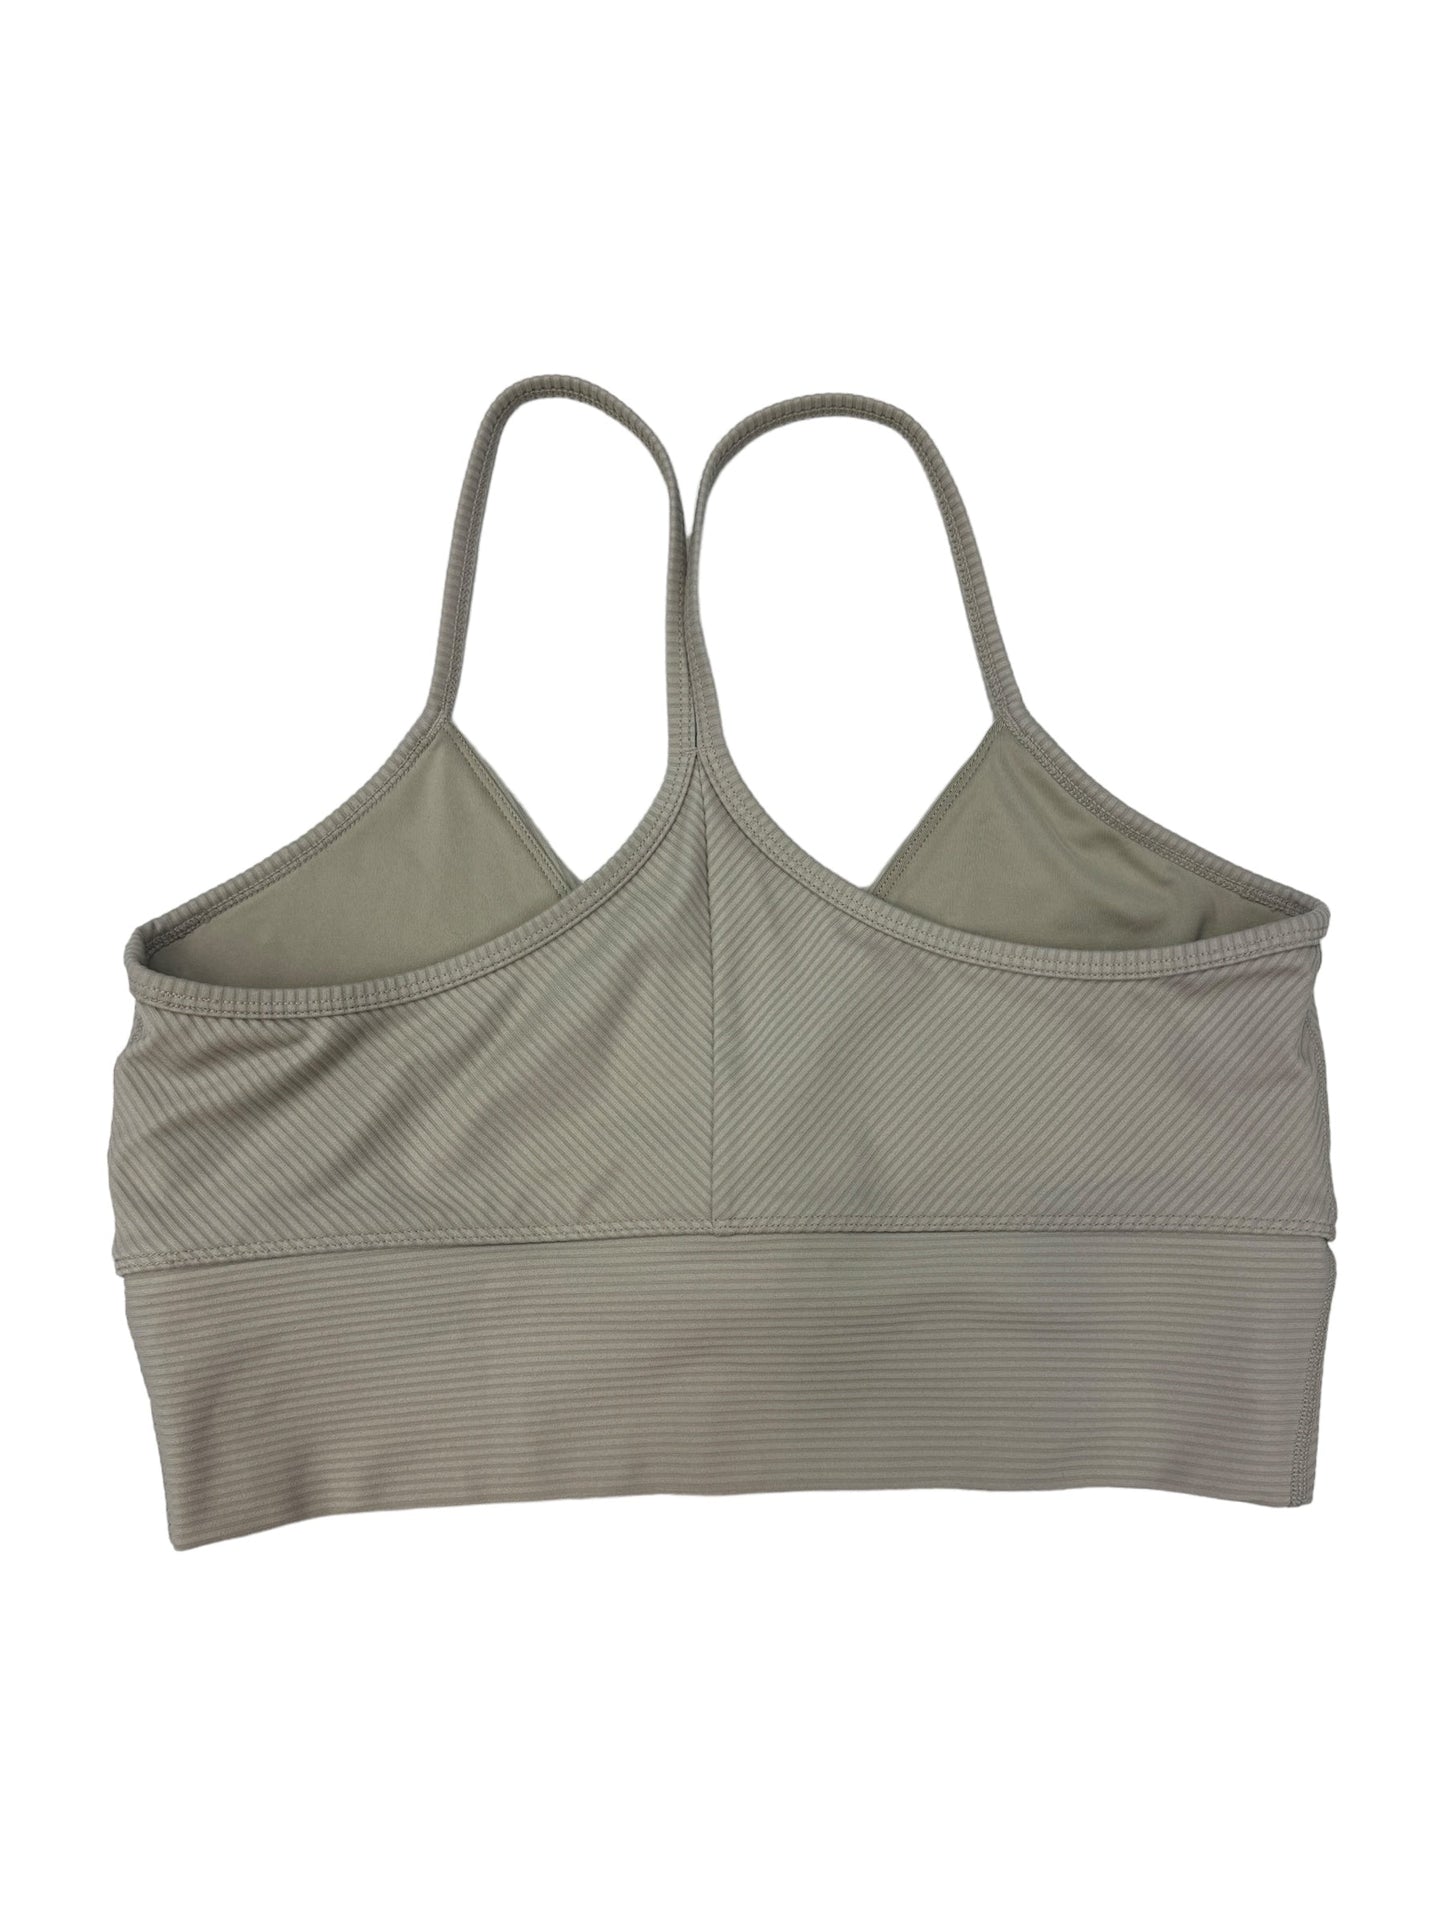 Athletic Bra By Good American  Size: M